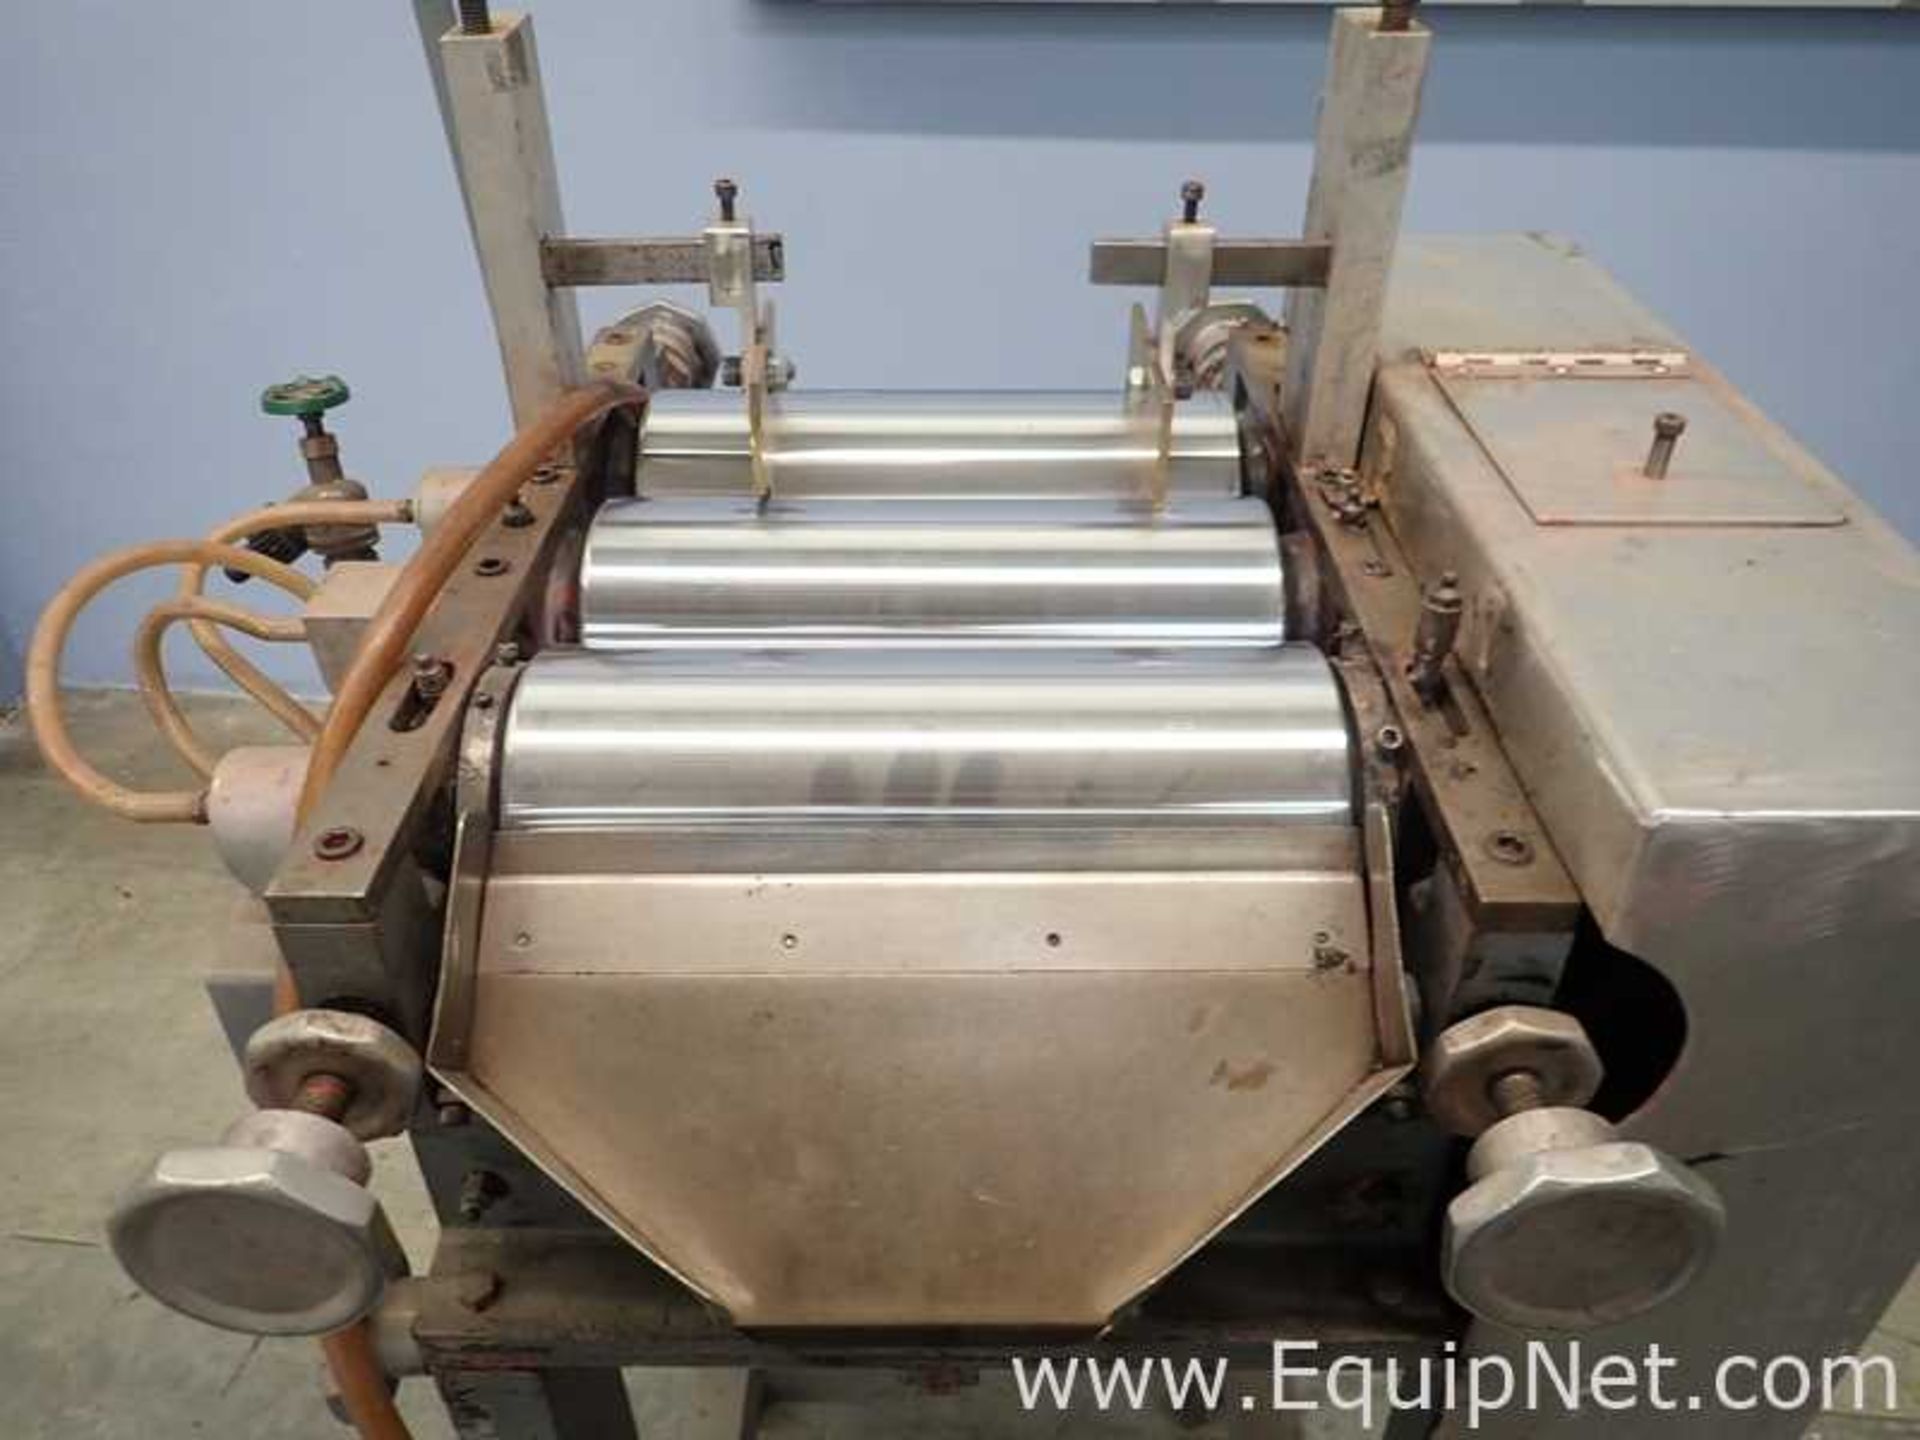 DESCRIPTION: This three roll mill is appx 12" in length EQUIPNET LISTING # 720238 HANDLING FEE: $ - Image 8 of 19